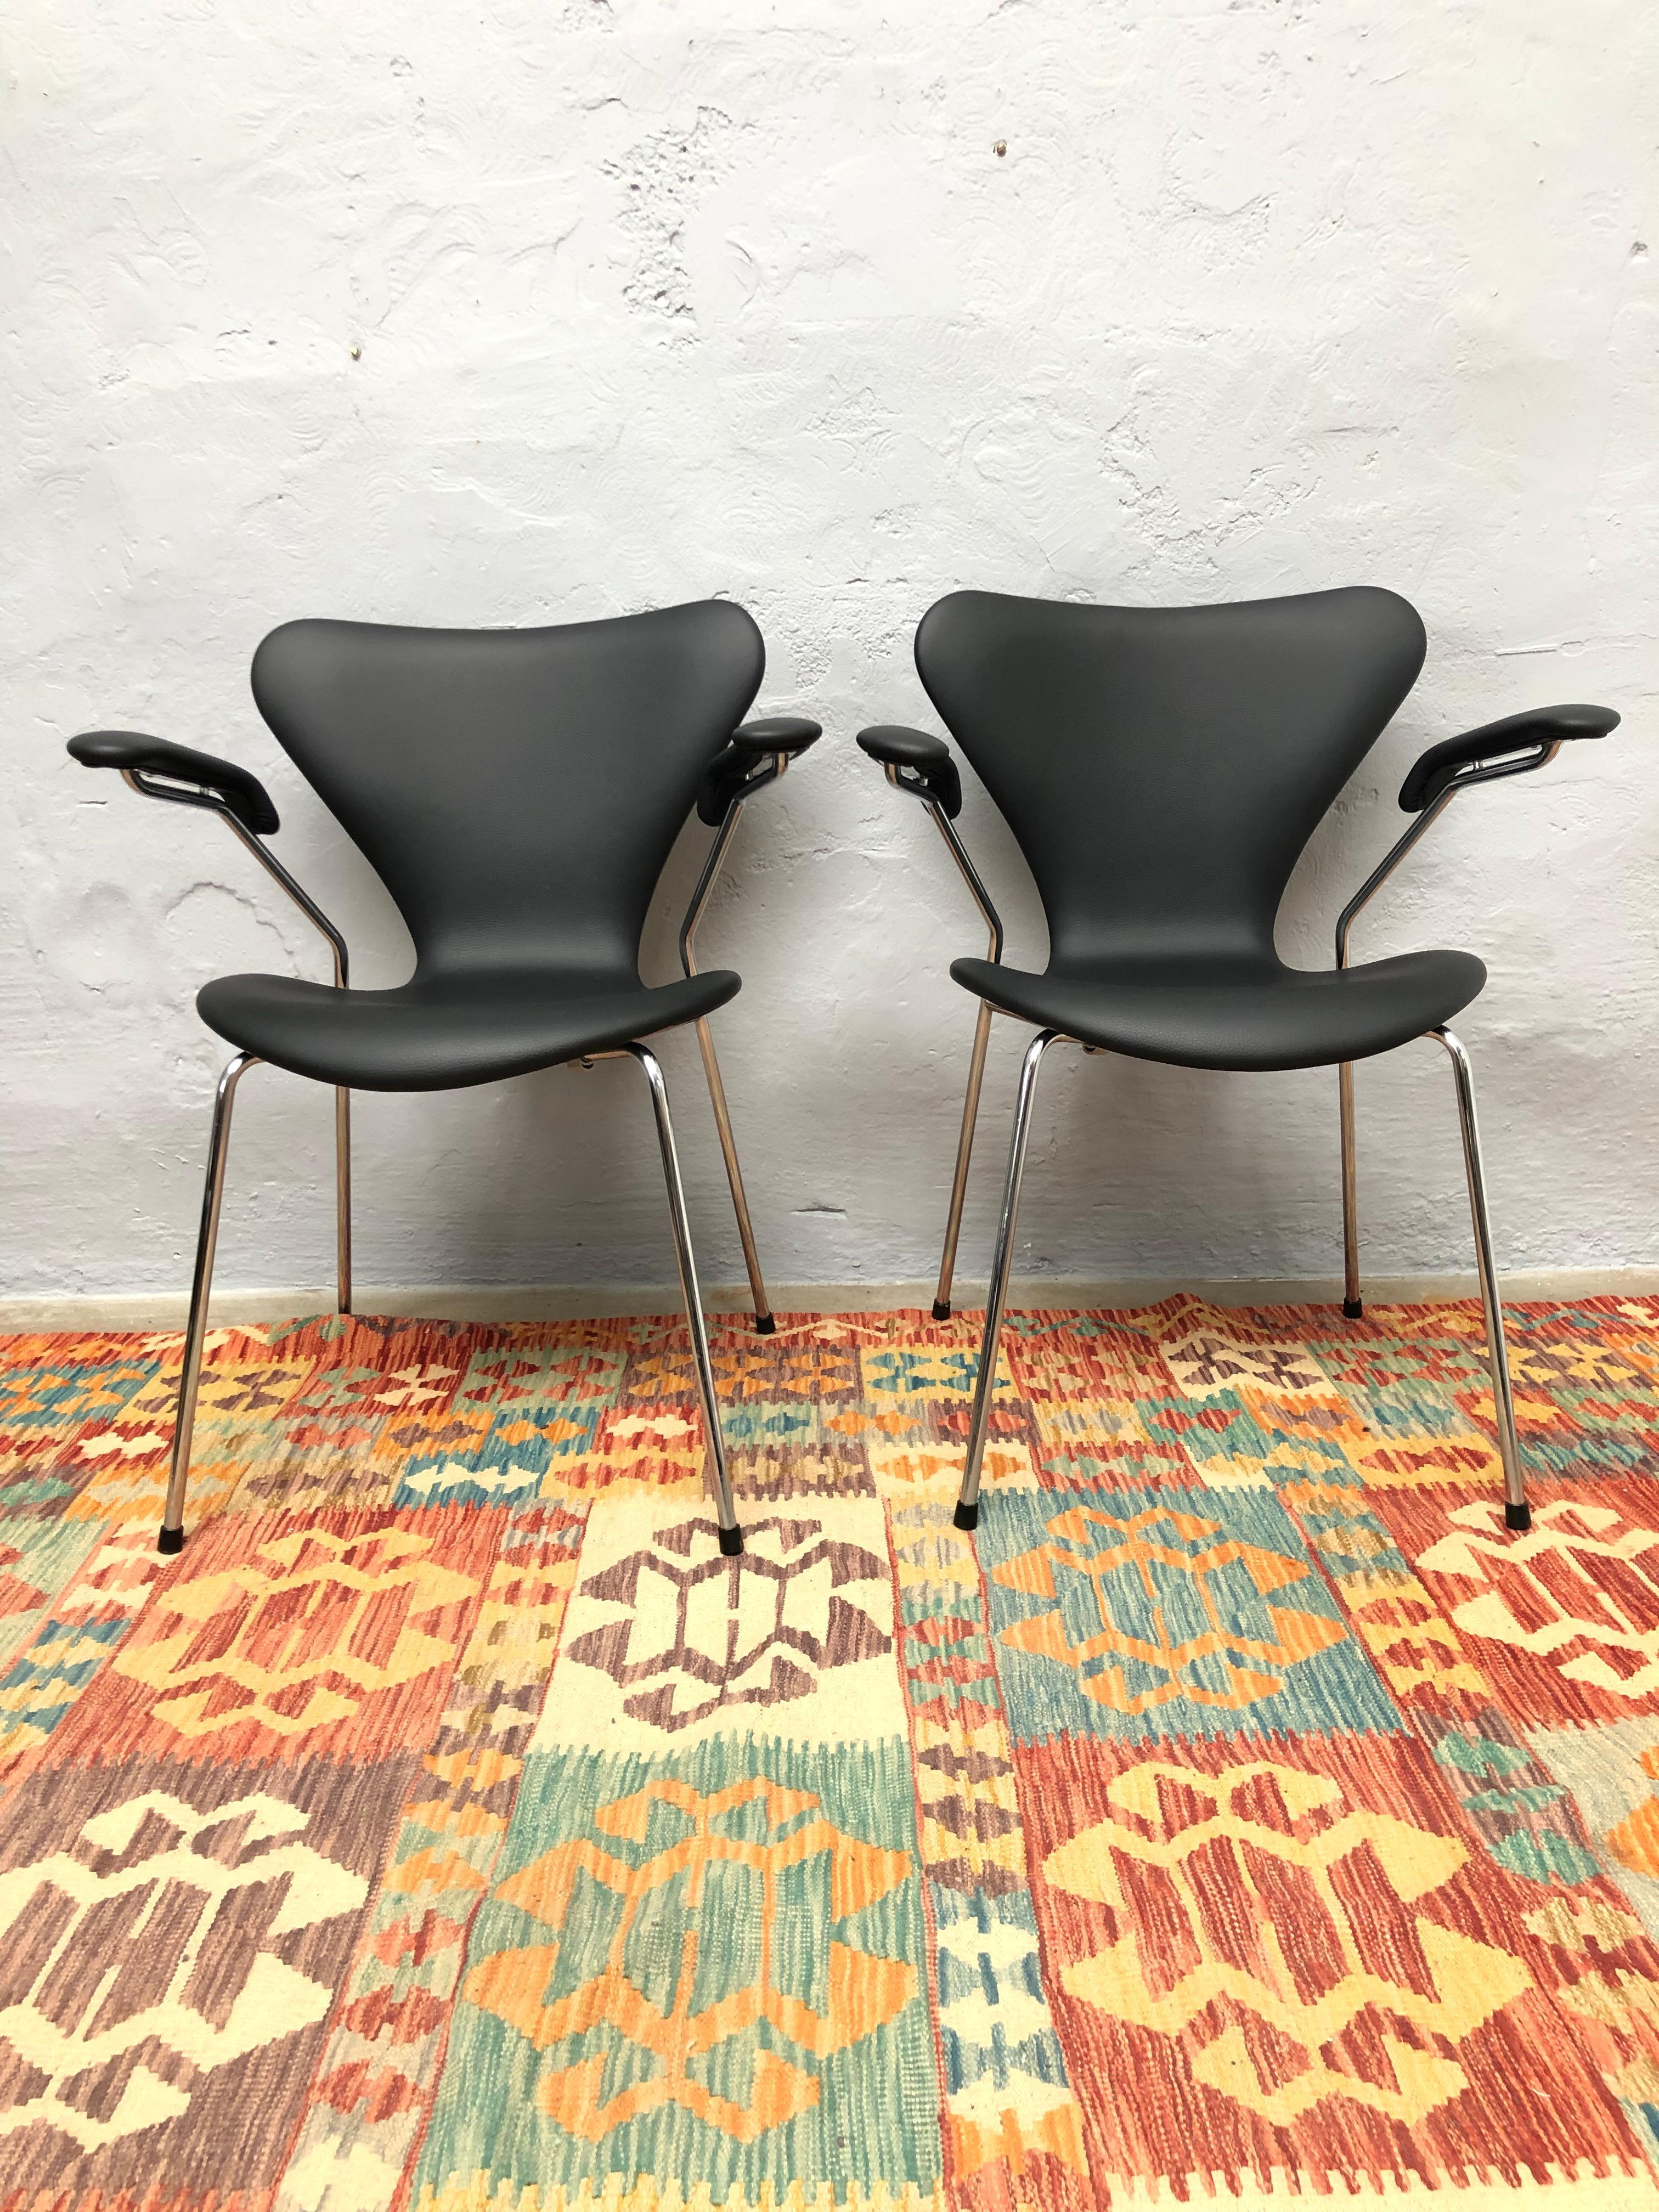 Danish Vintage Set of 6 Iconic Arne Jacobsen 3207 Chairs Designed in 1955